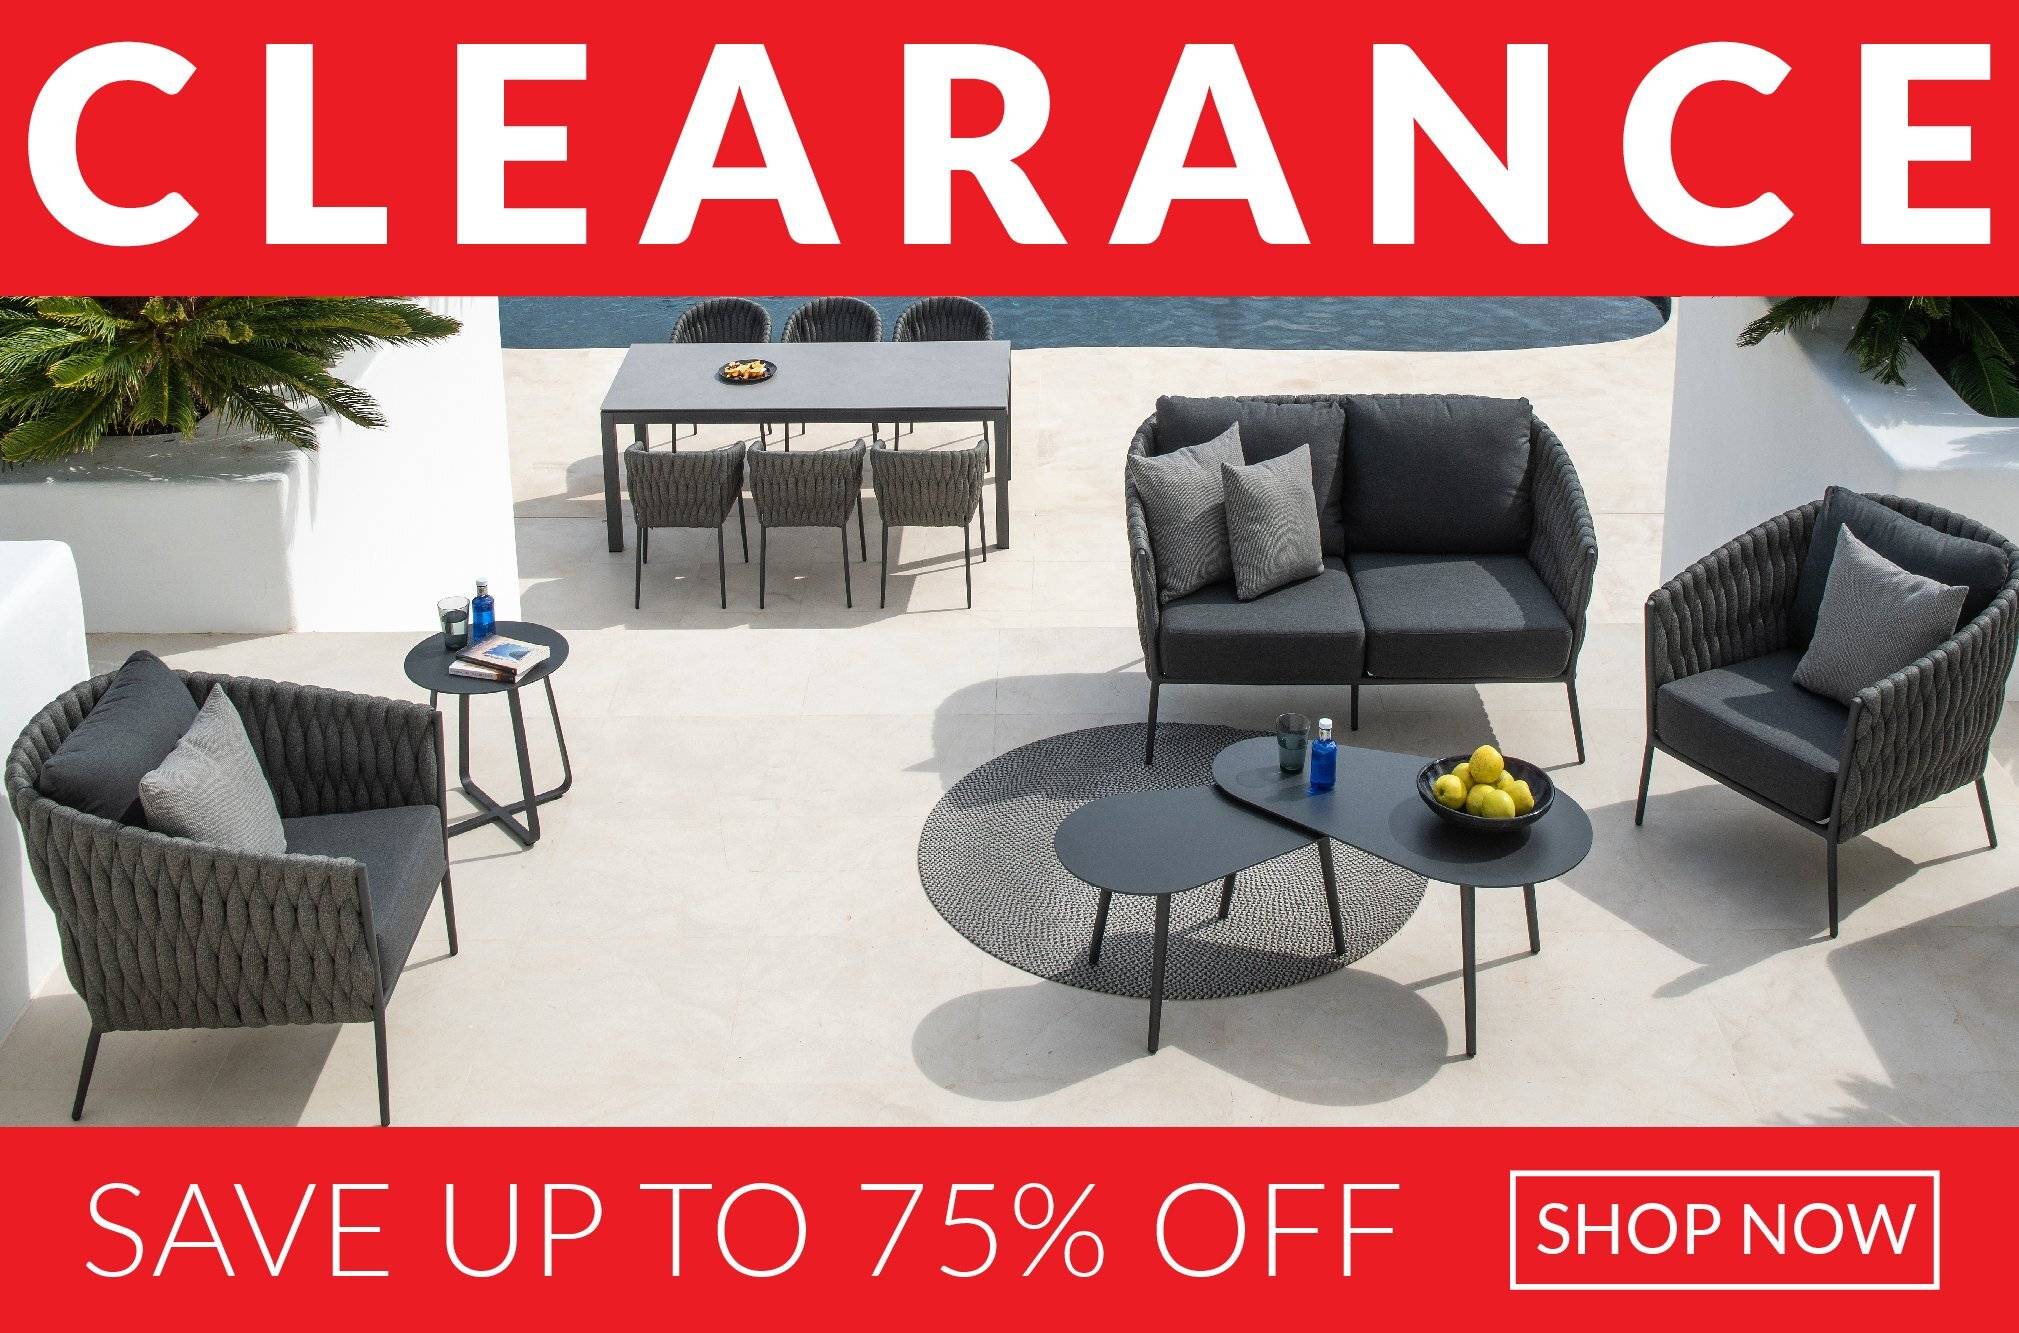 Clearance Sale on Fortuna Socks Outdoor Seating - Save up to 65% off